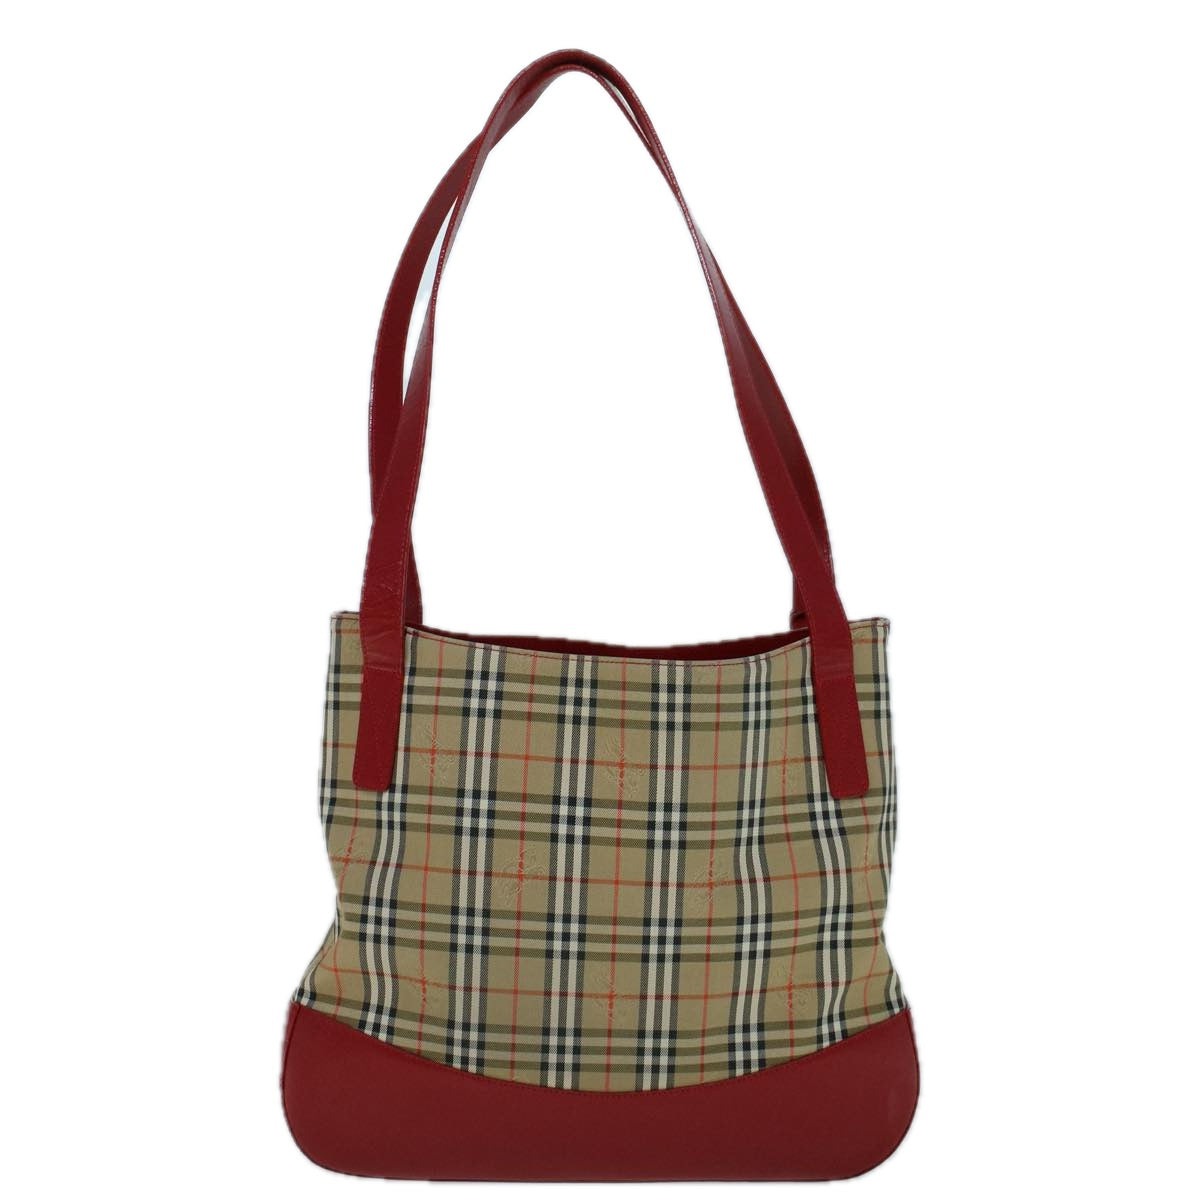 Burberrys Nova Check Tote Bag Canvas Beige Red Auth 56573